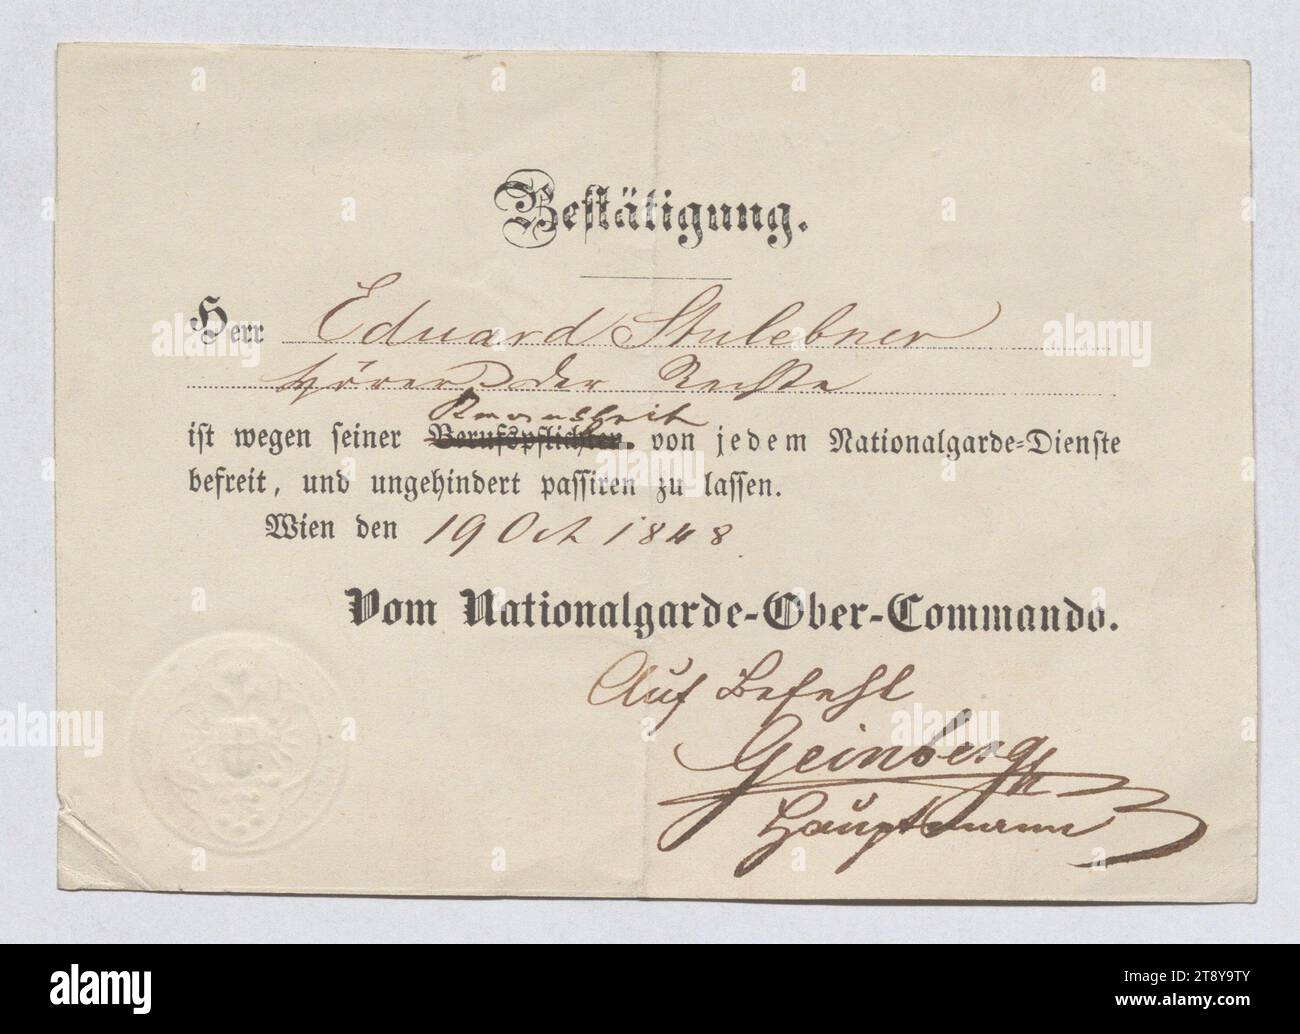 Confirmation of exemption from National Guard service for Eduard Stulebner, signed 'Geinberg, Hauptmann', Unknown, 1848, paper, print and handwriting, height 10 cm, width 14, 1 cm, Military, Revolutions of 1848, 1849, communication (military), The Vienna Collection Stock Photo